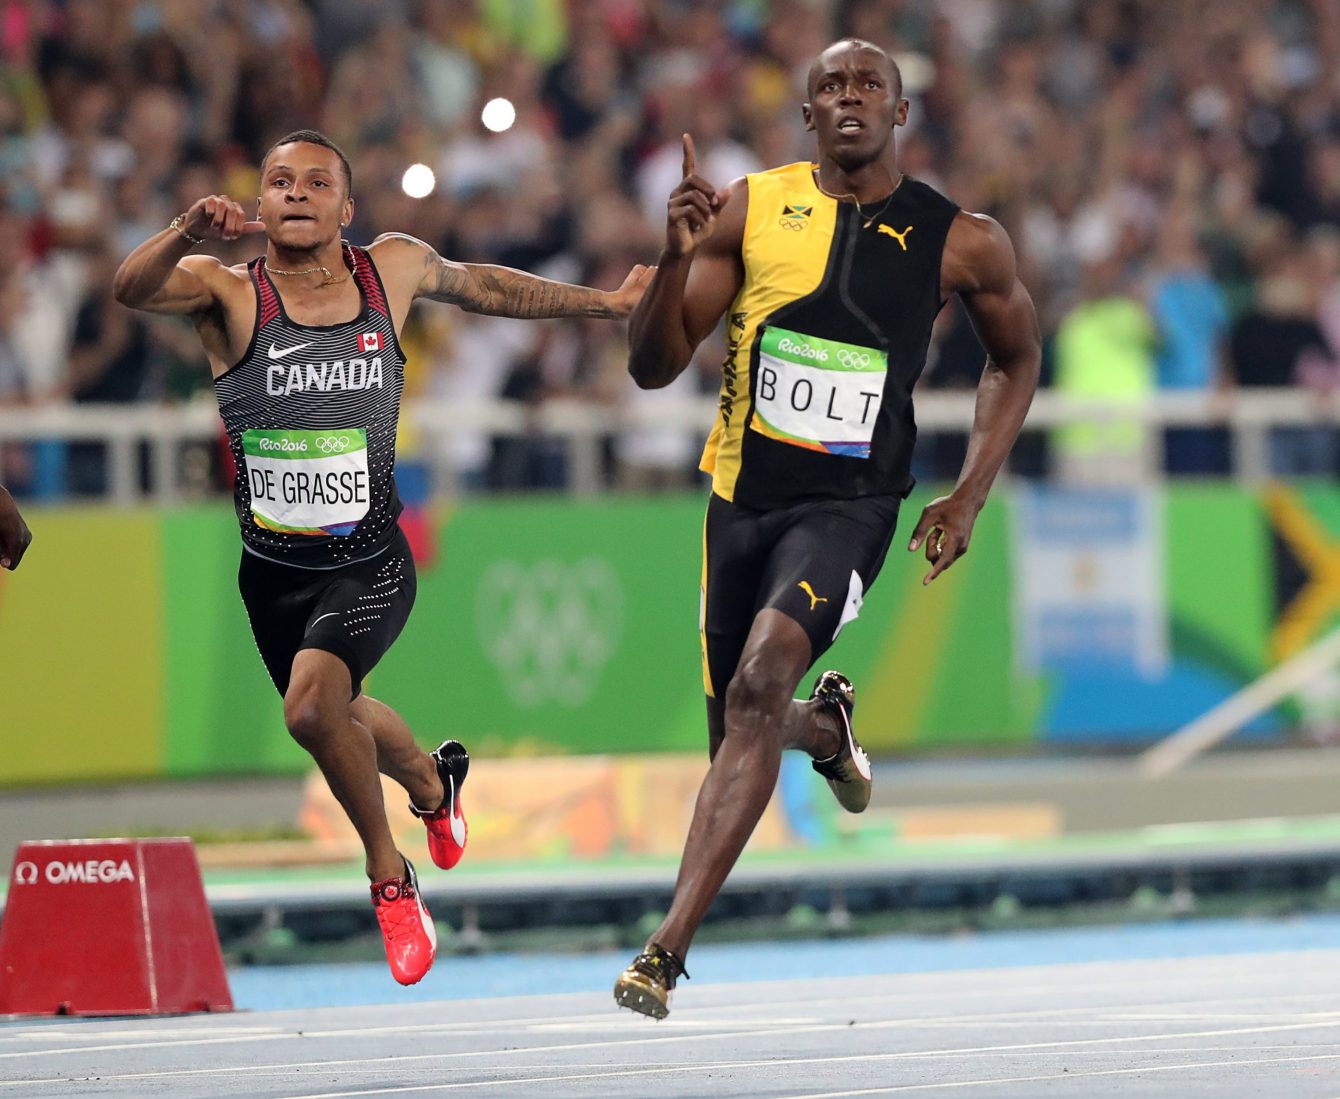 Jamaica's Usain Bolt celebrates as he crosses the line to win gold in the men's 100-meter final with Canada's Andre de Grasse during the athletics competitions of the 2016 Summer Olympics at the Olympic stadium in Rio de Janeiro, Brazil, Sunday, Aug. 14, 2016. (AP Photo/Lee Jin-man)